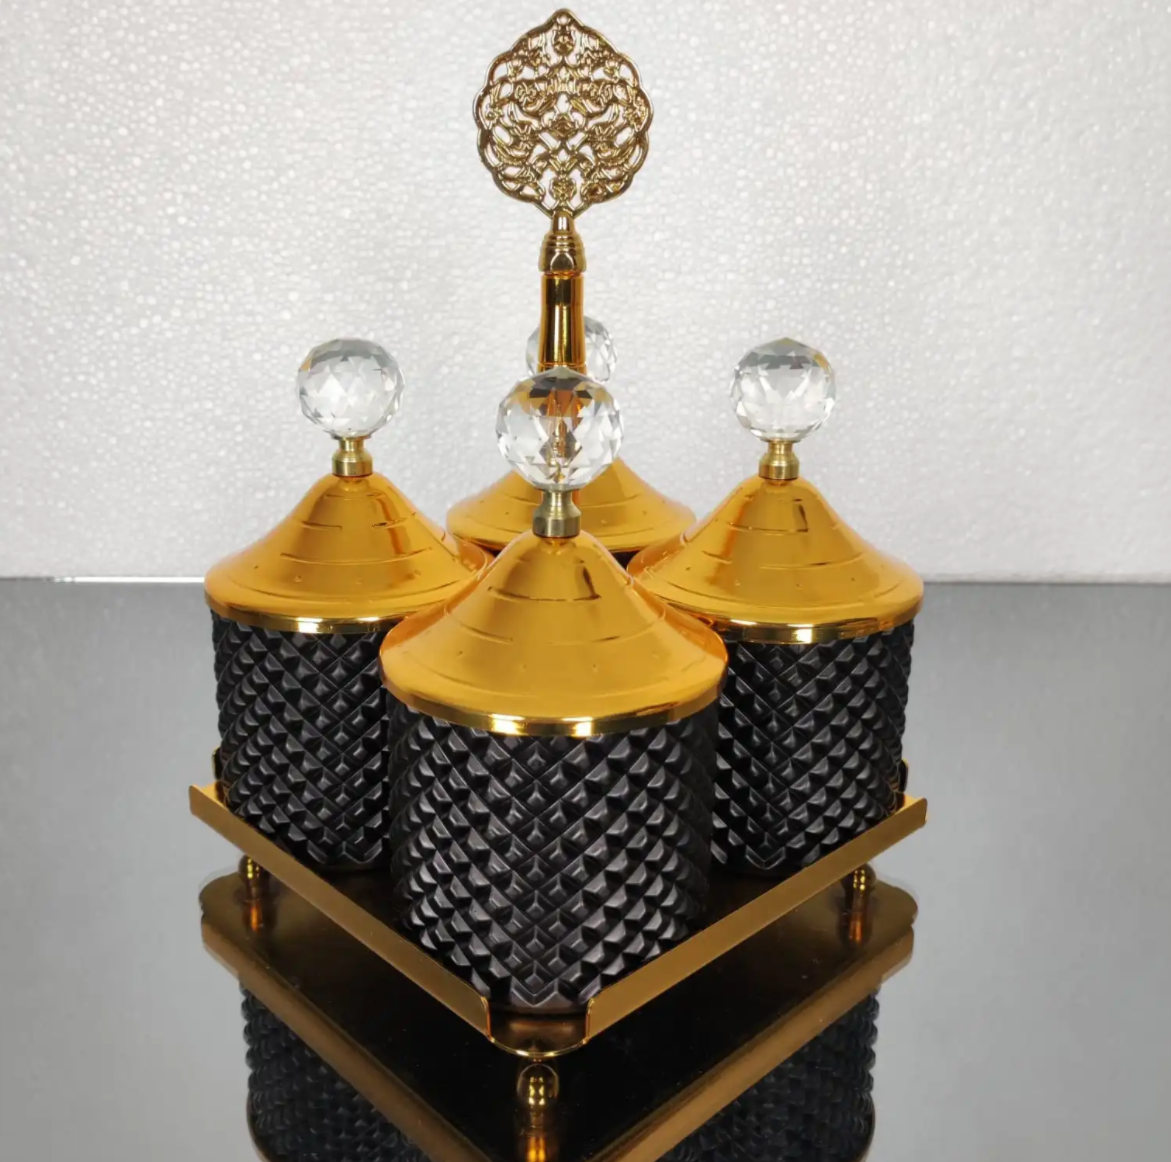 Gold  and Black Spices Hammered Canister with Stand 4 pcs Set